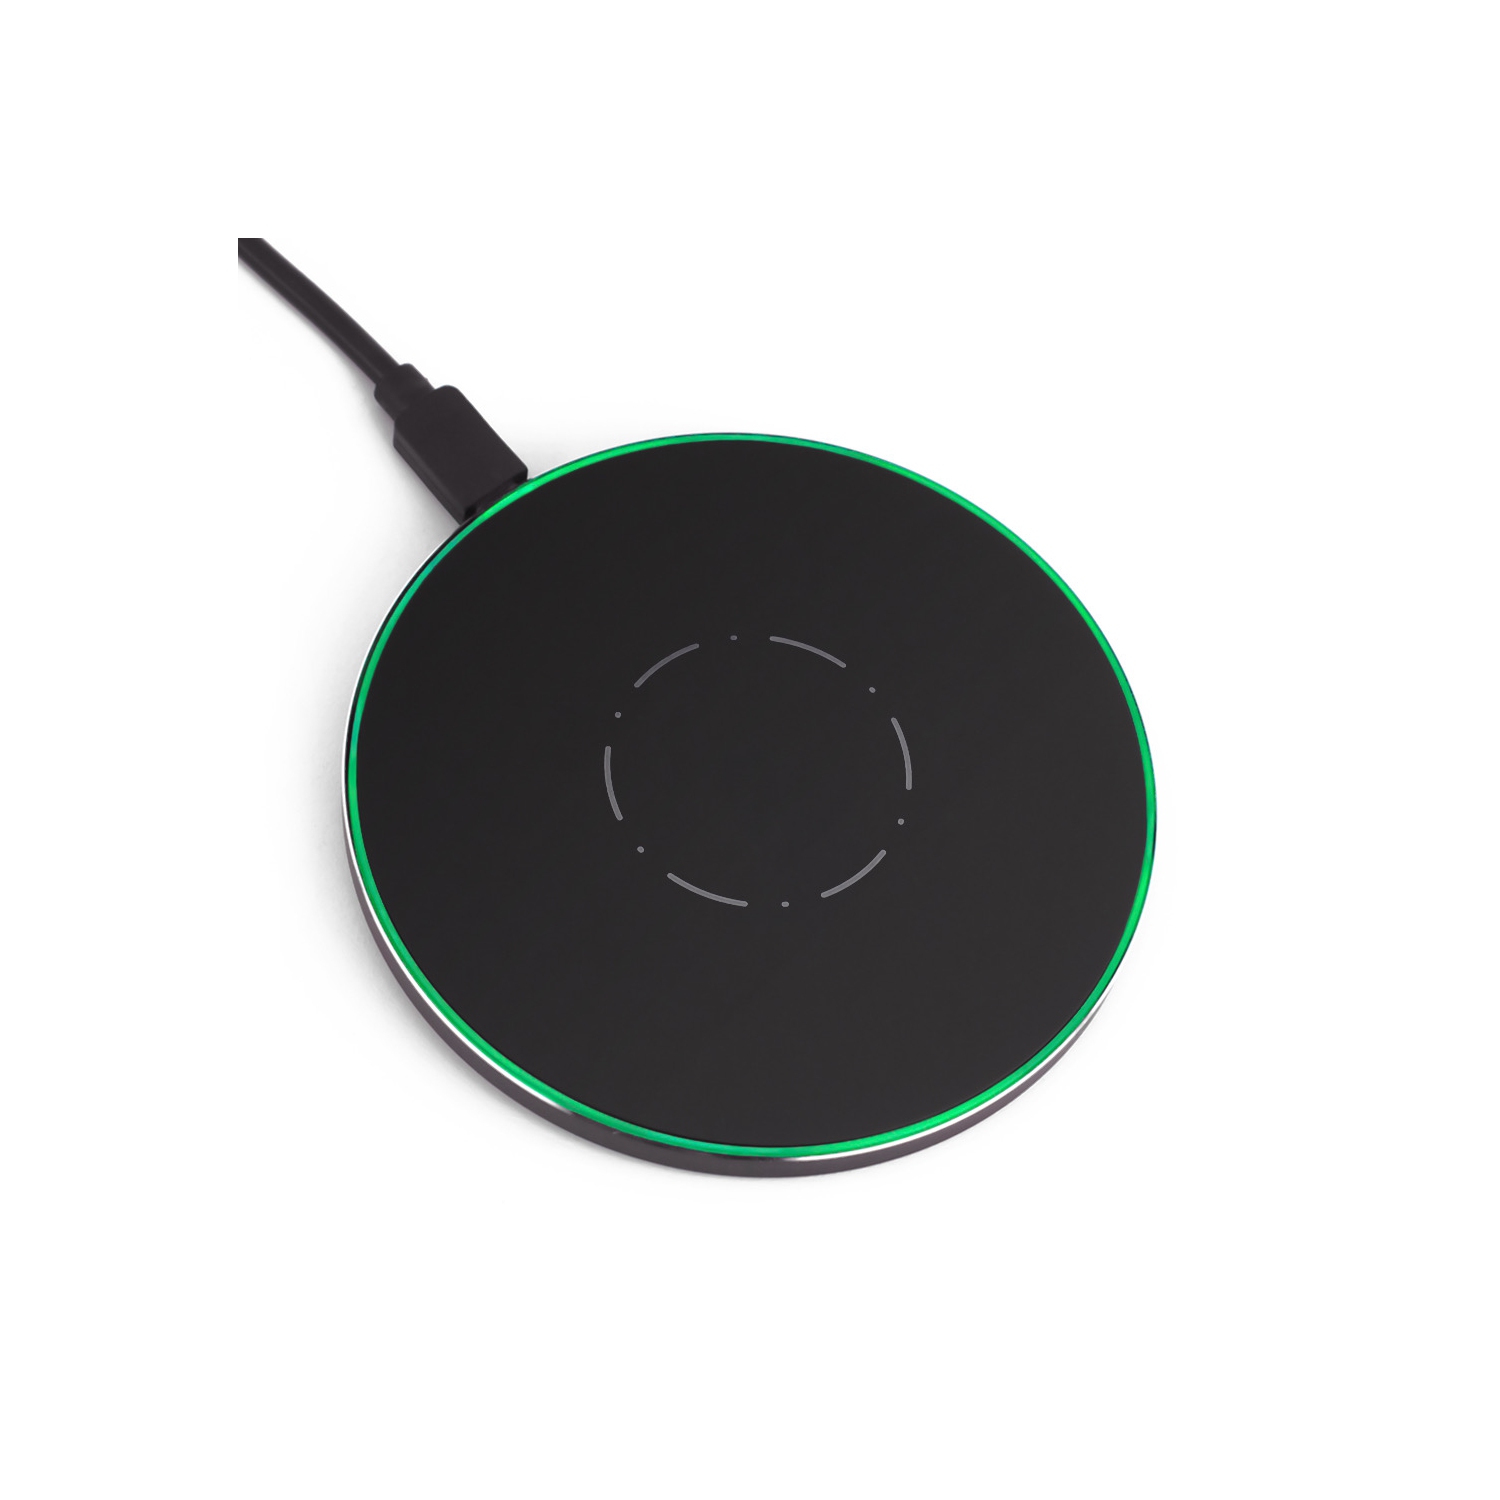 Etallic Air Wireless Charger for iPhone, Samsung, Google & All Qi Enabled Phones